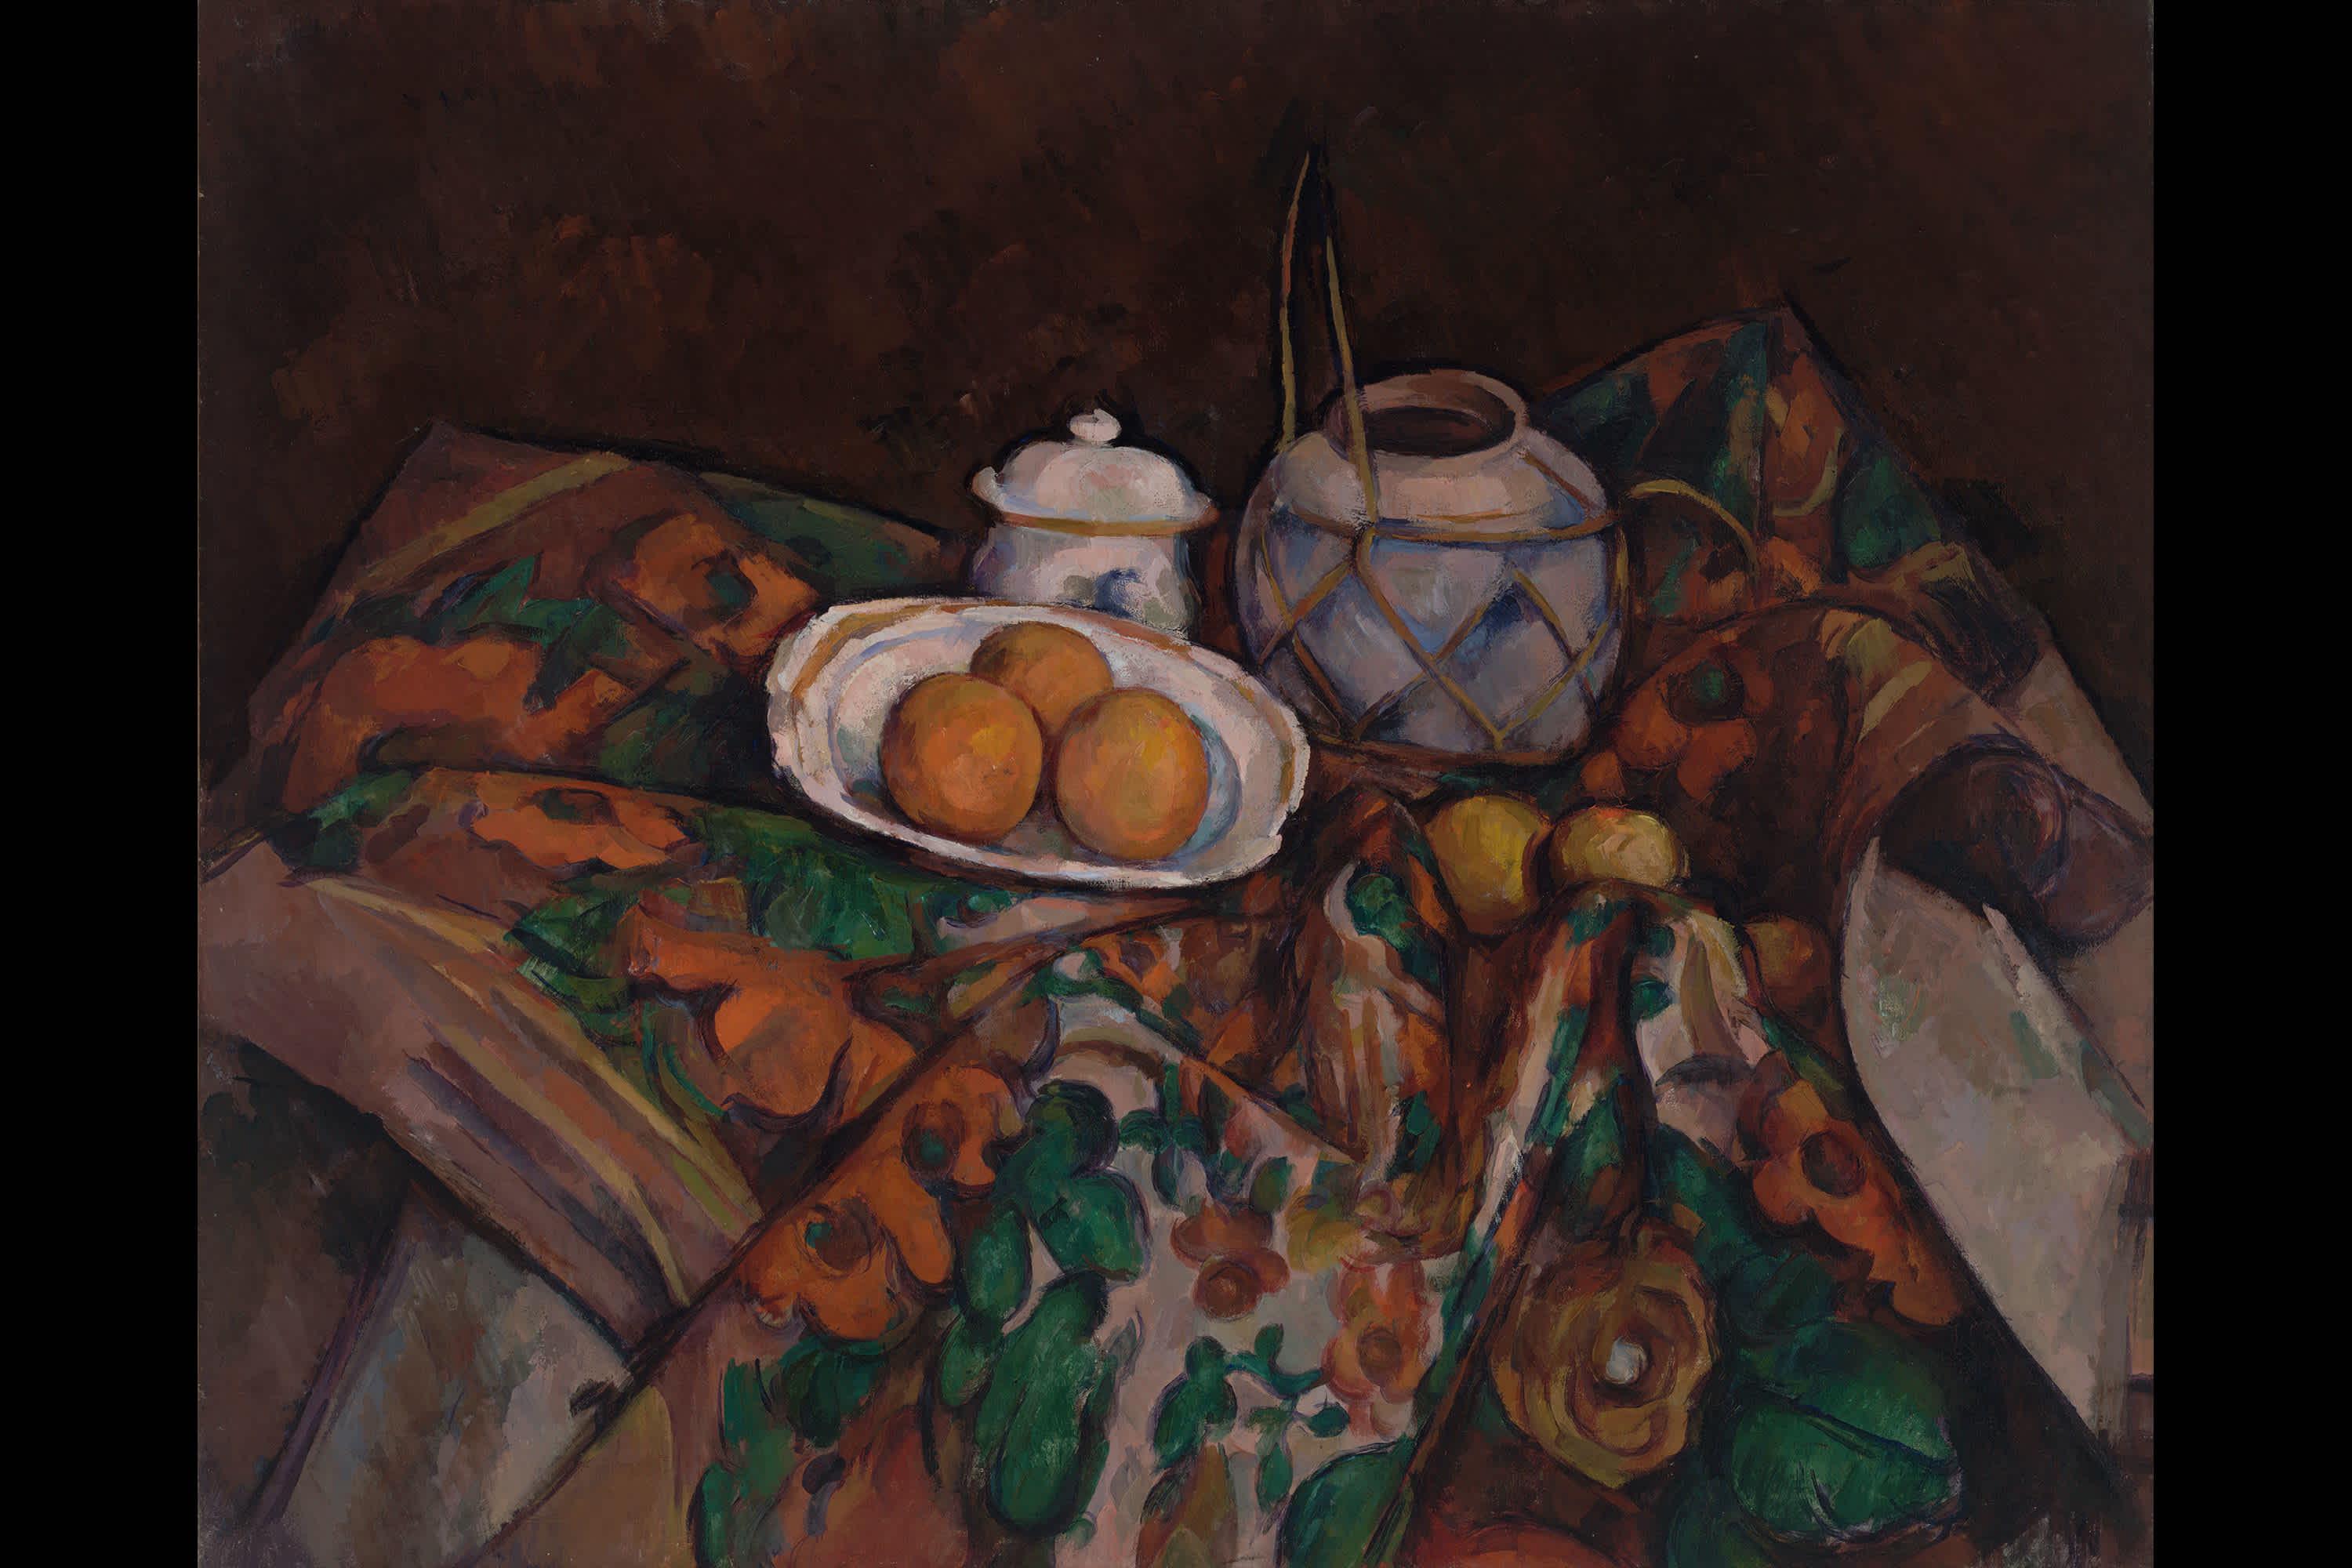 Paul Cezanne, Still Life with Ginger Jar, Sugar Bowl, and Oranges, Painting, Museum of Modern Art